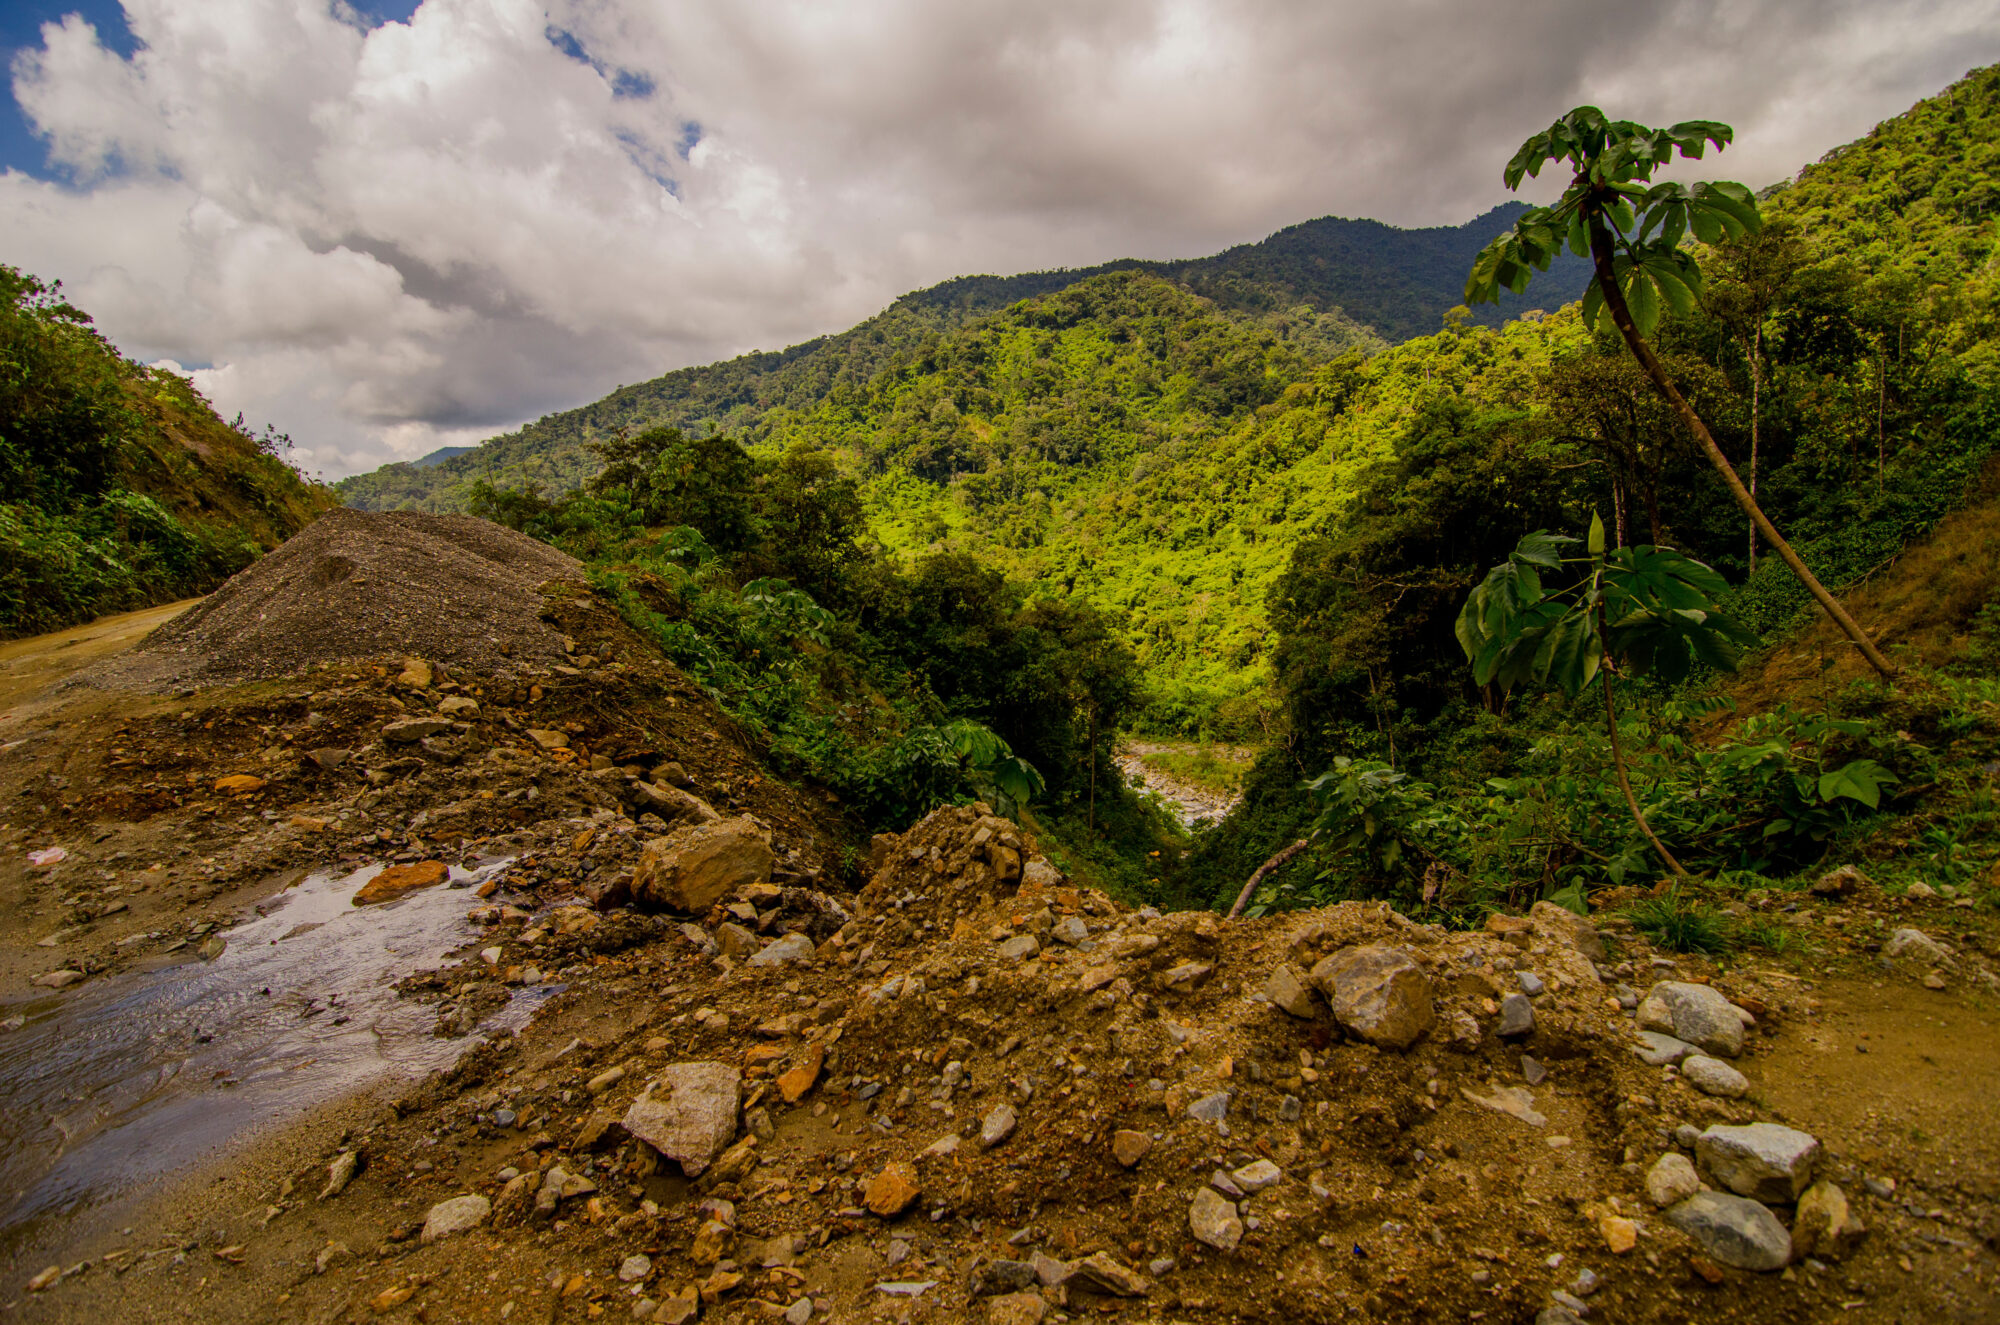 <p>A road in the Manu National Park in Madre de Dios, Peru. The new Cusco–Madre de Dios Road Corridor will cross the park’s buffer zone, but there are concerns over impacts on indigenous groups in voluntary isolation in this corner of the Amazon (Image: Amazon-Images / Alamy)</p>